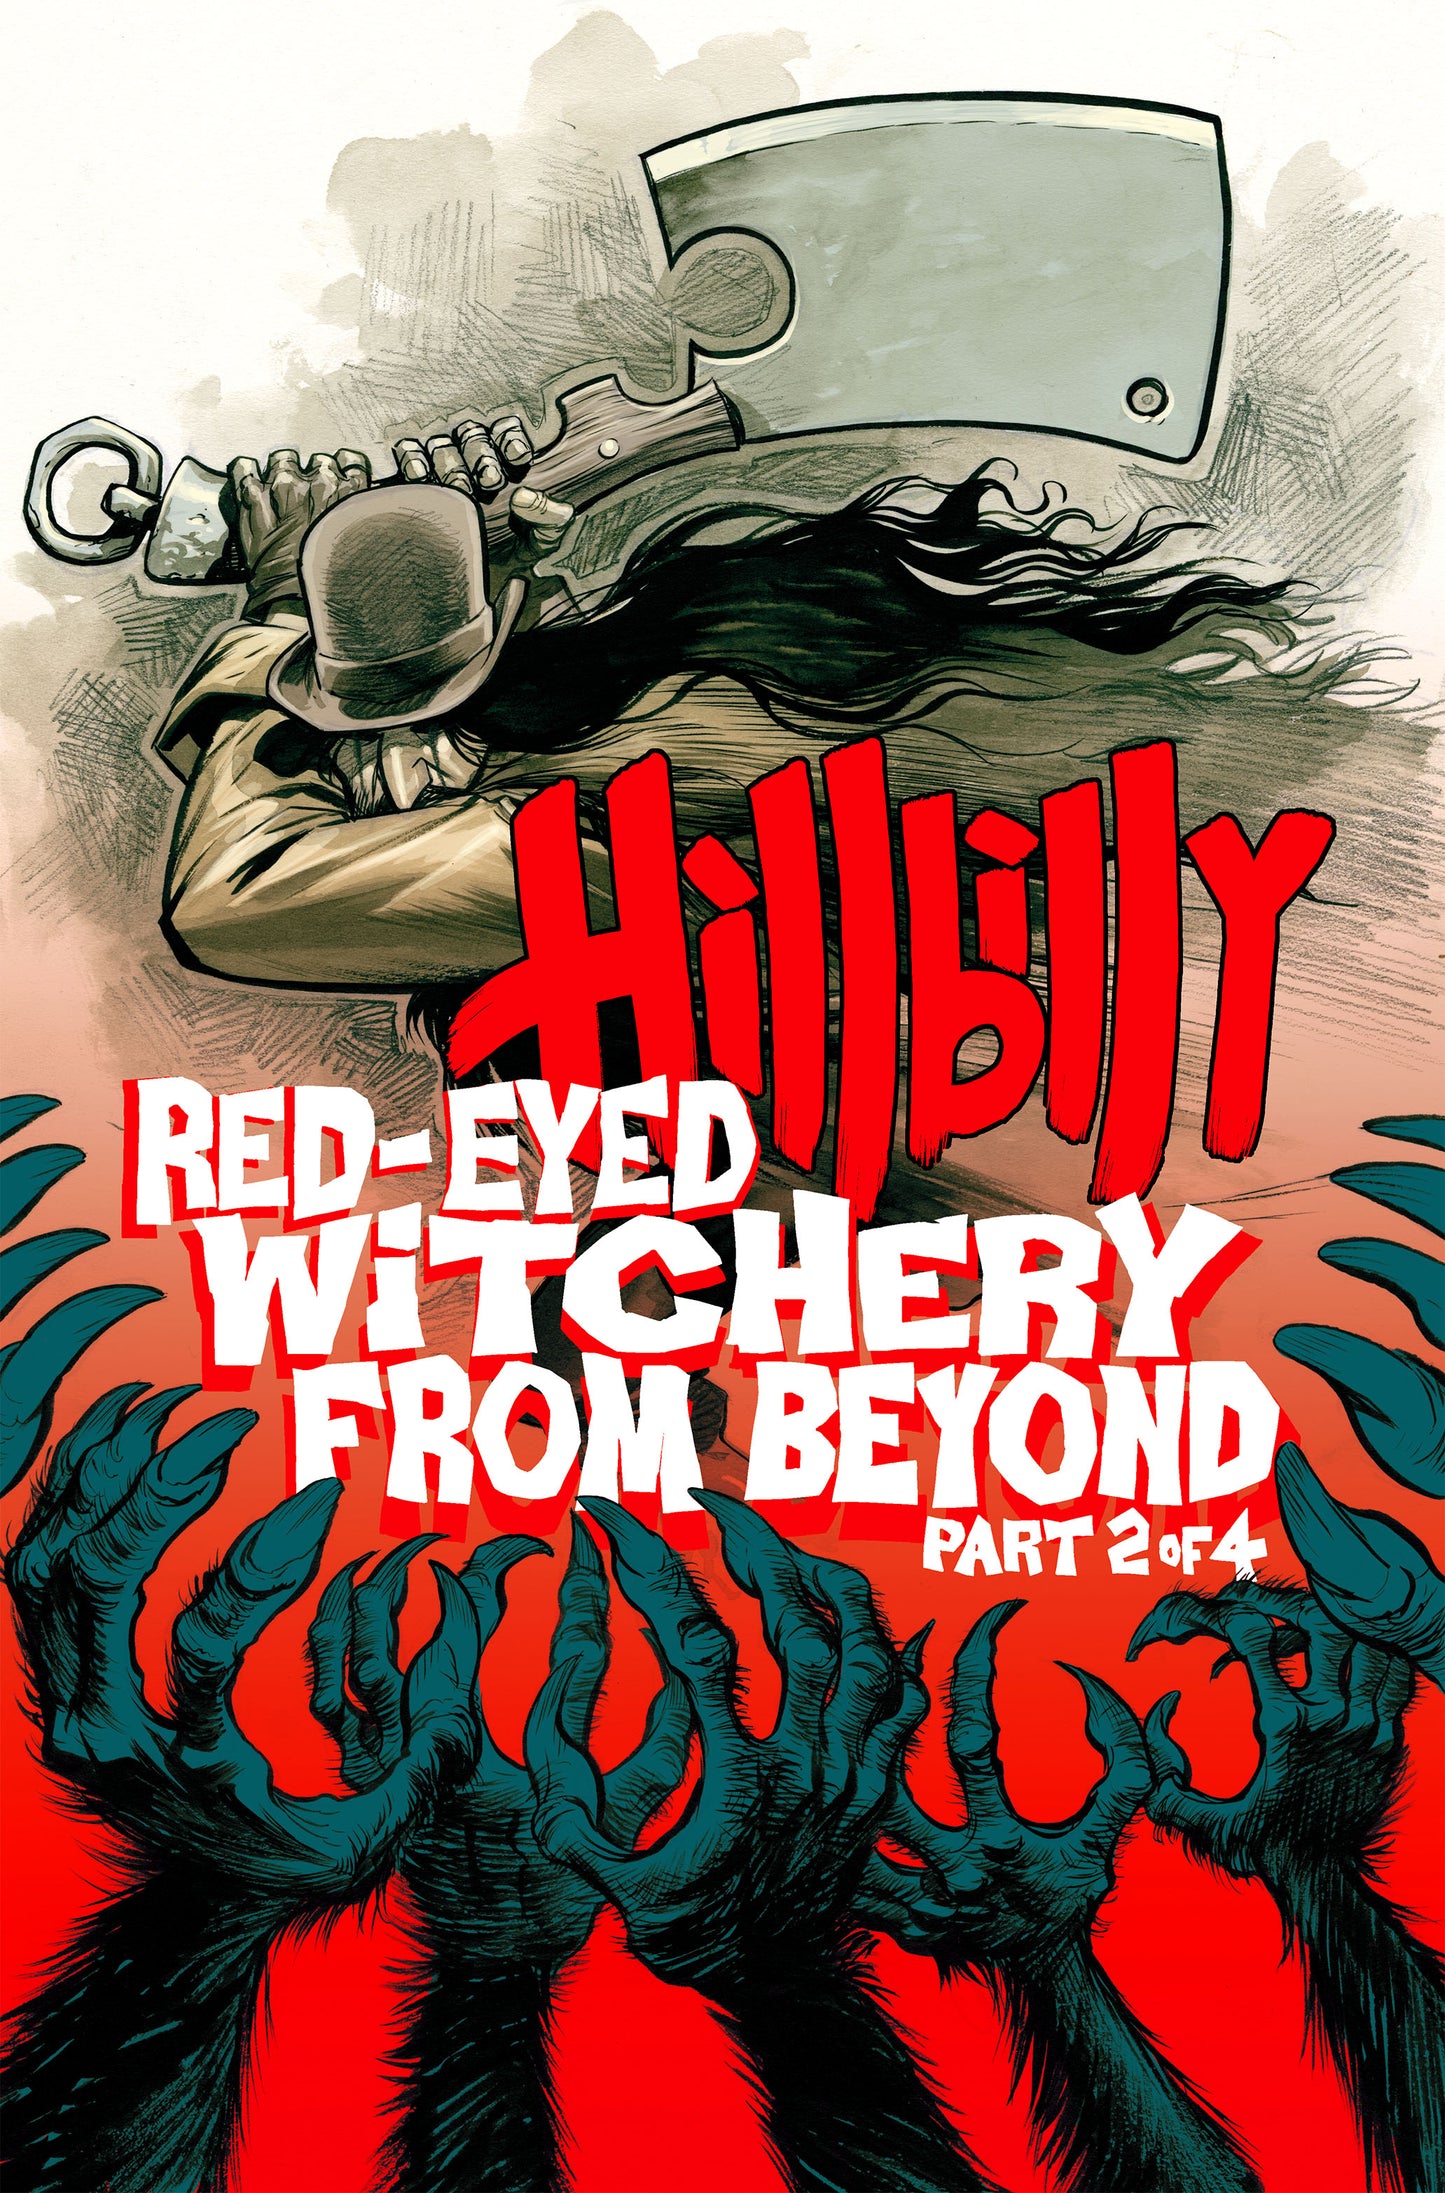 Hillbilly Red-Eyed Witchery #2 of 4